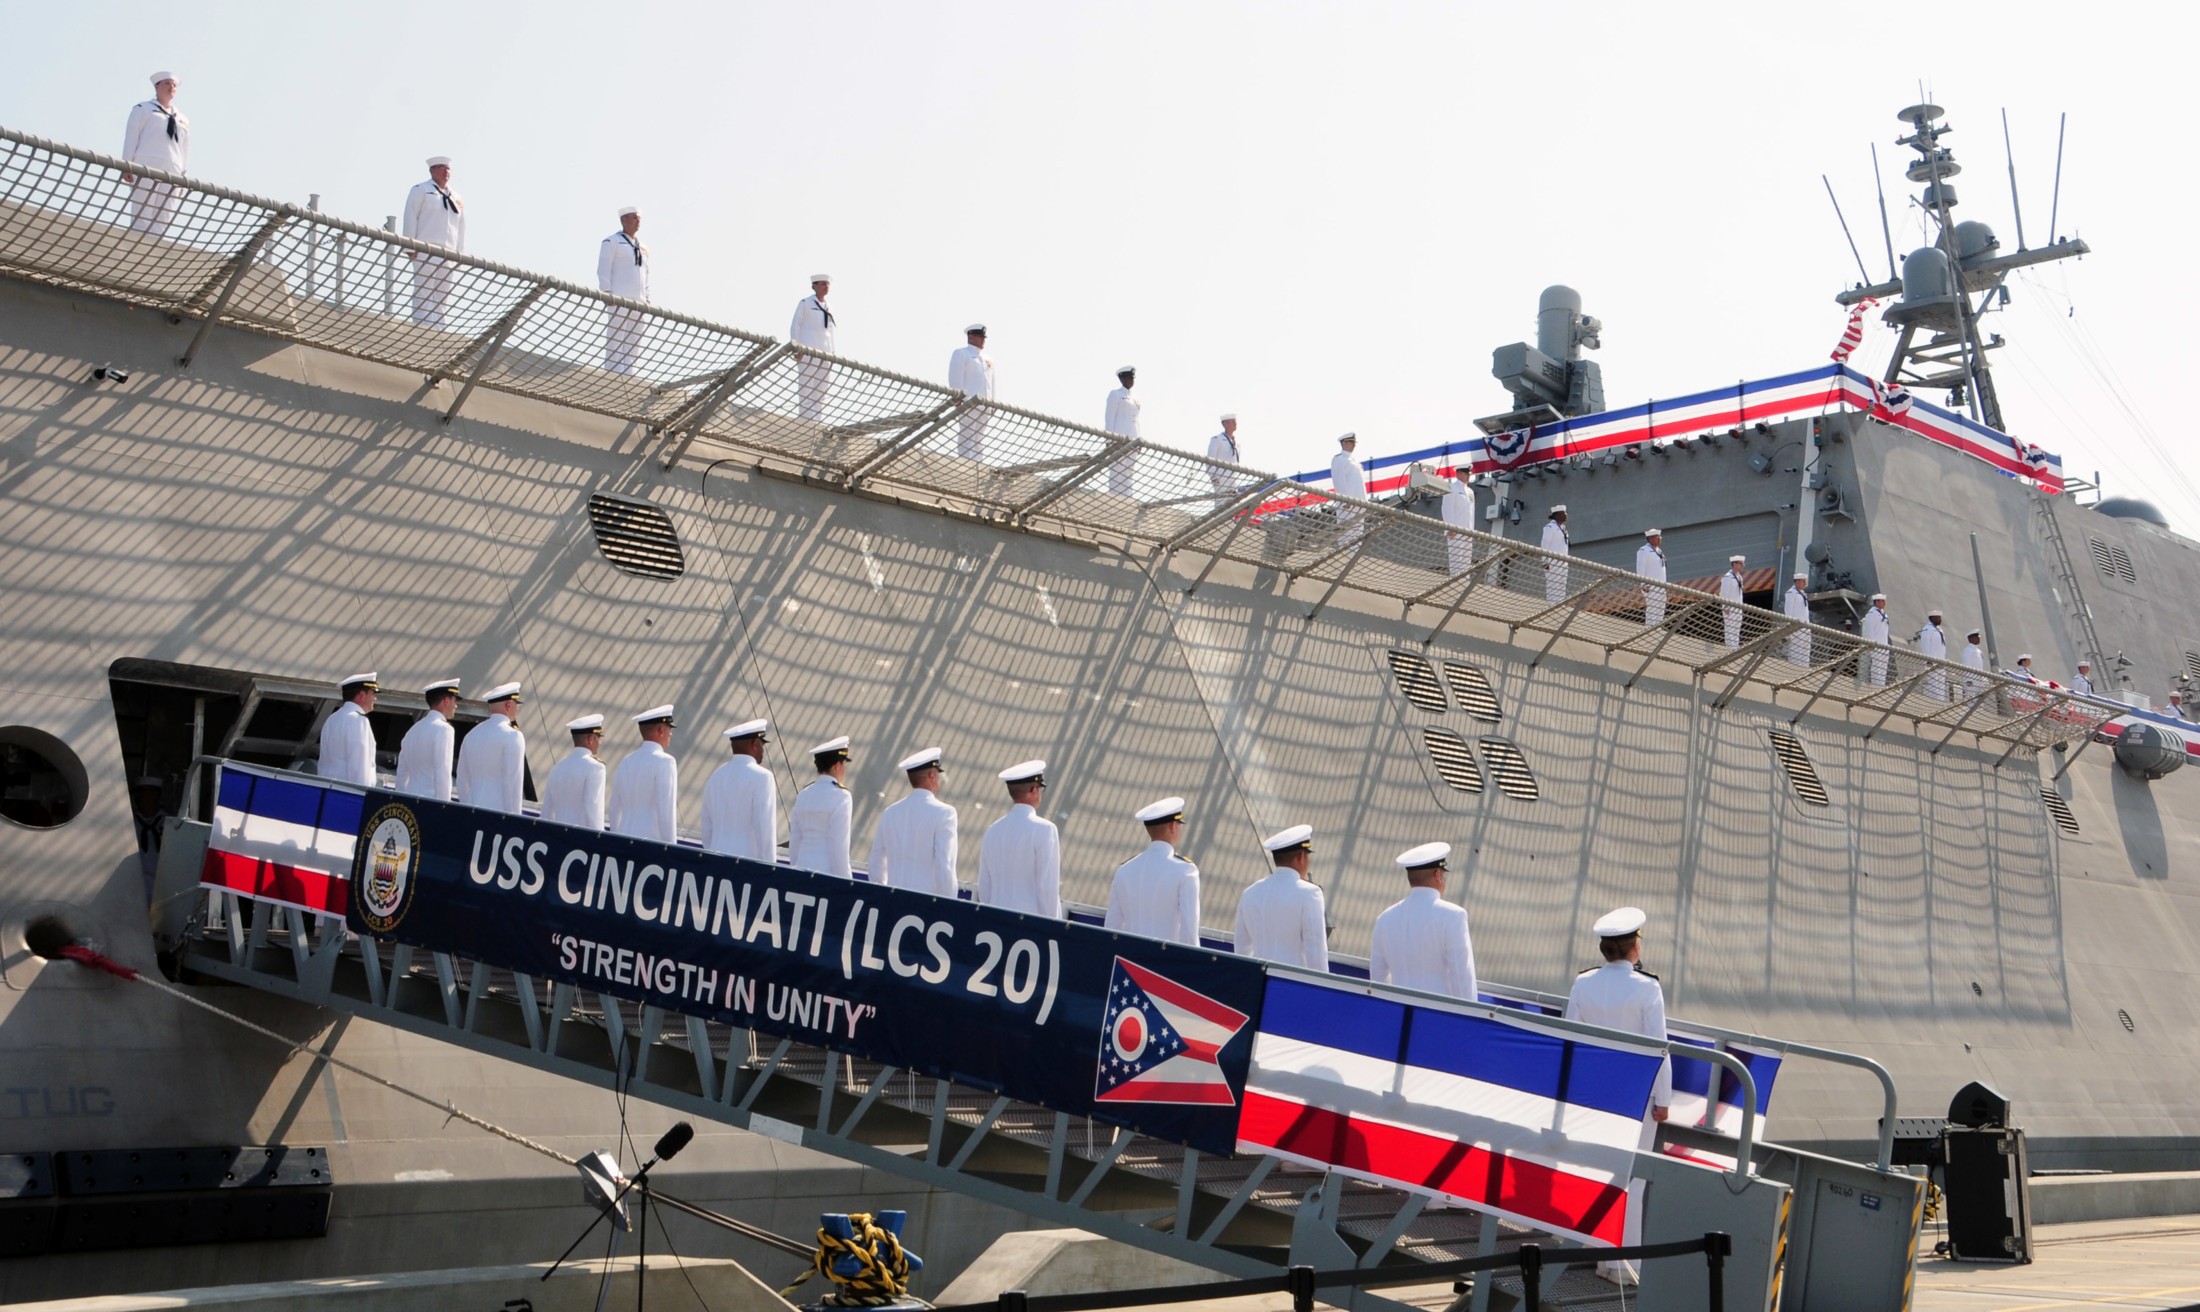 lcs-20 uss cincinnati littoral combat ship independence class us navy 06 commissioning gulfport mississippi